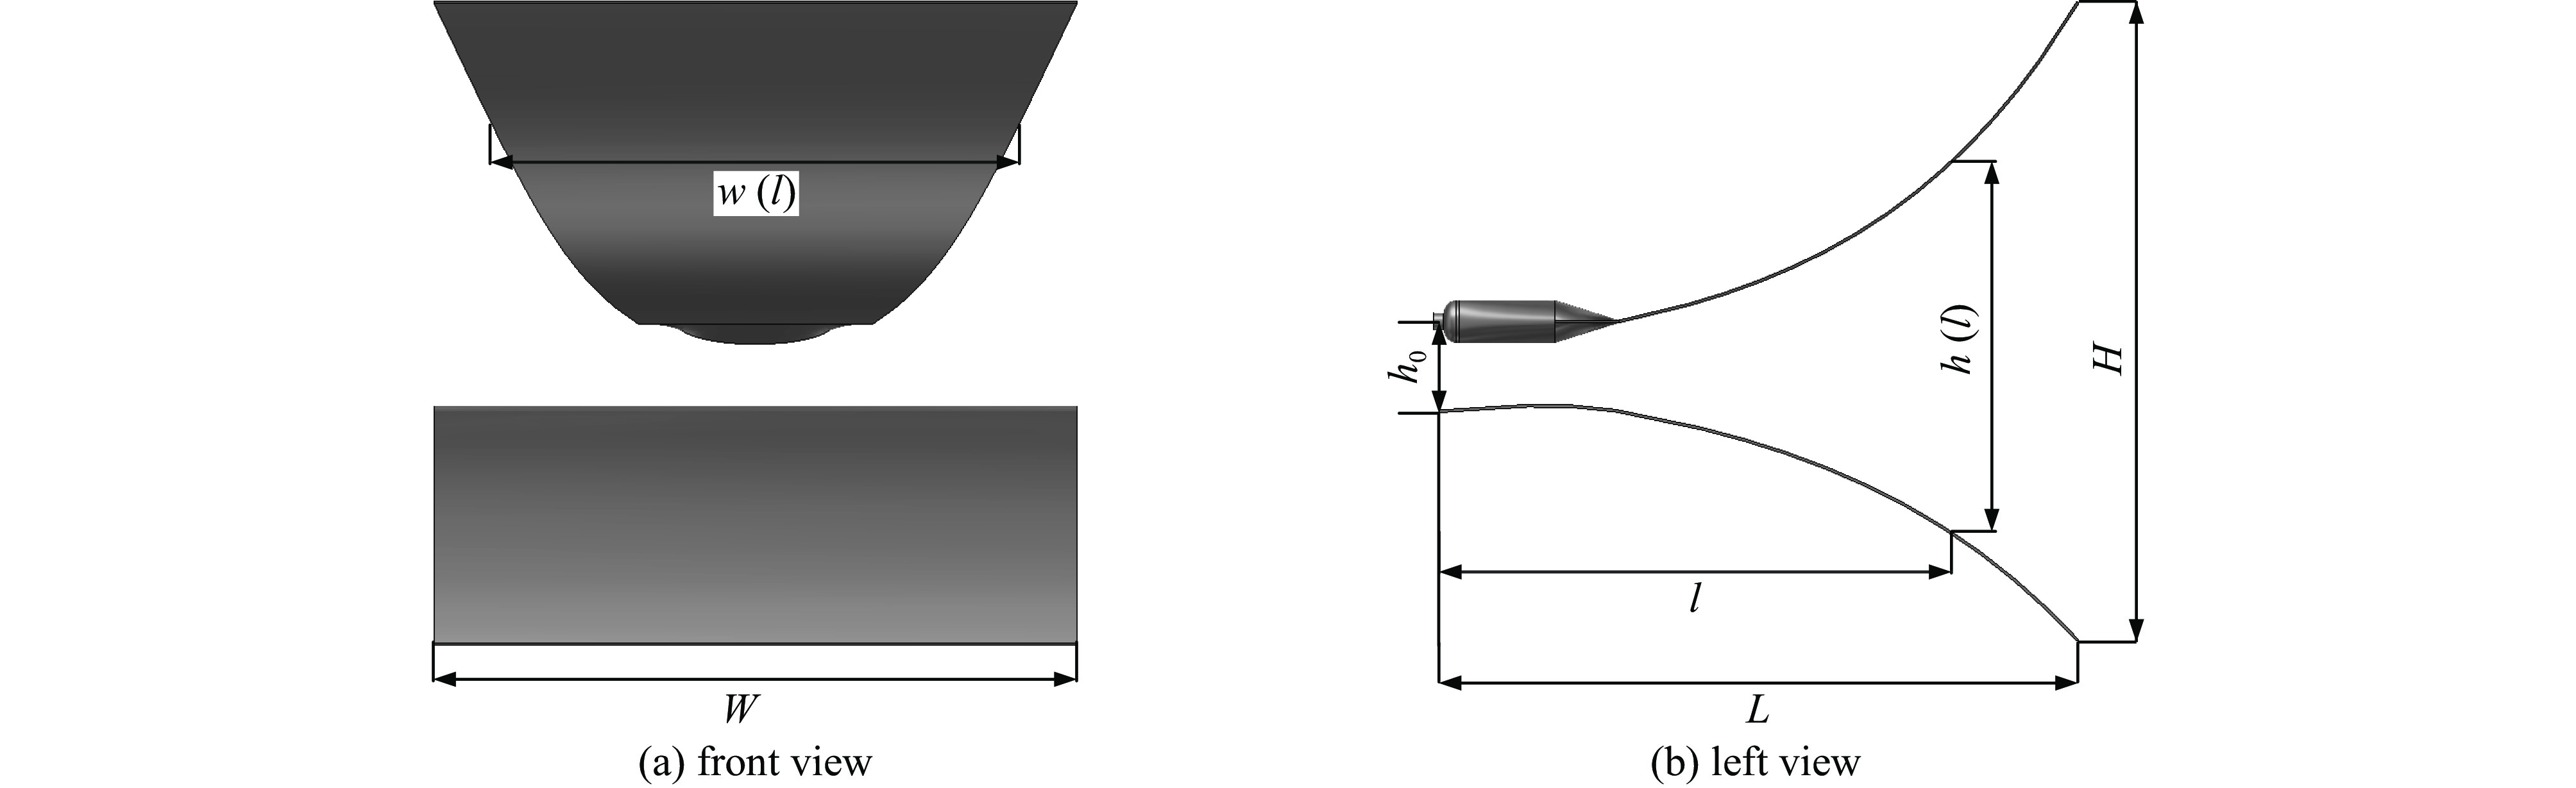 Sketch of the TEM horn part of the HP-UWB combined antenna